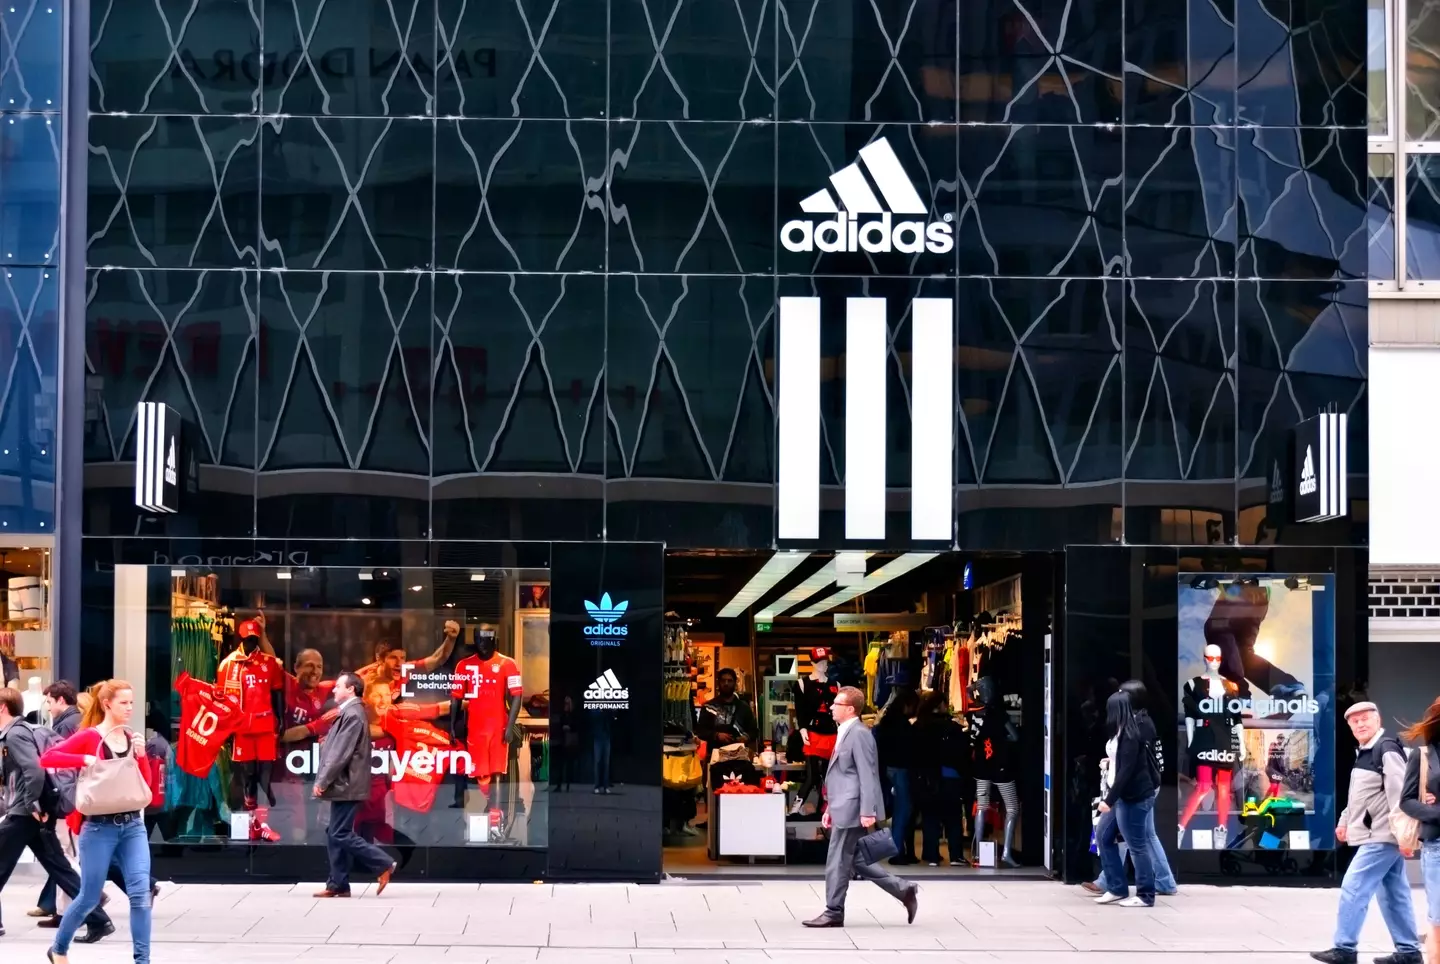 Adidas is one of the biggest sportswear brands in the world, but the name doesn't stand for 'All Day I Dream About Sports'.